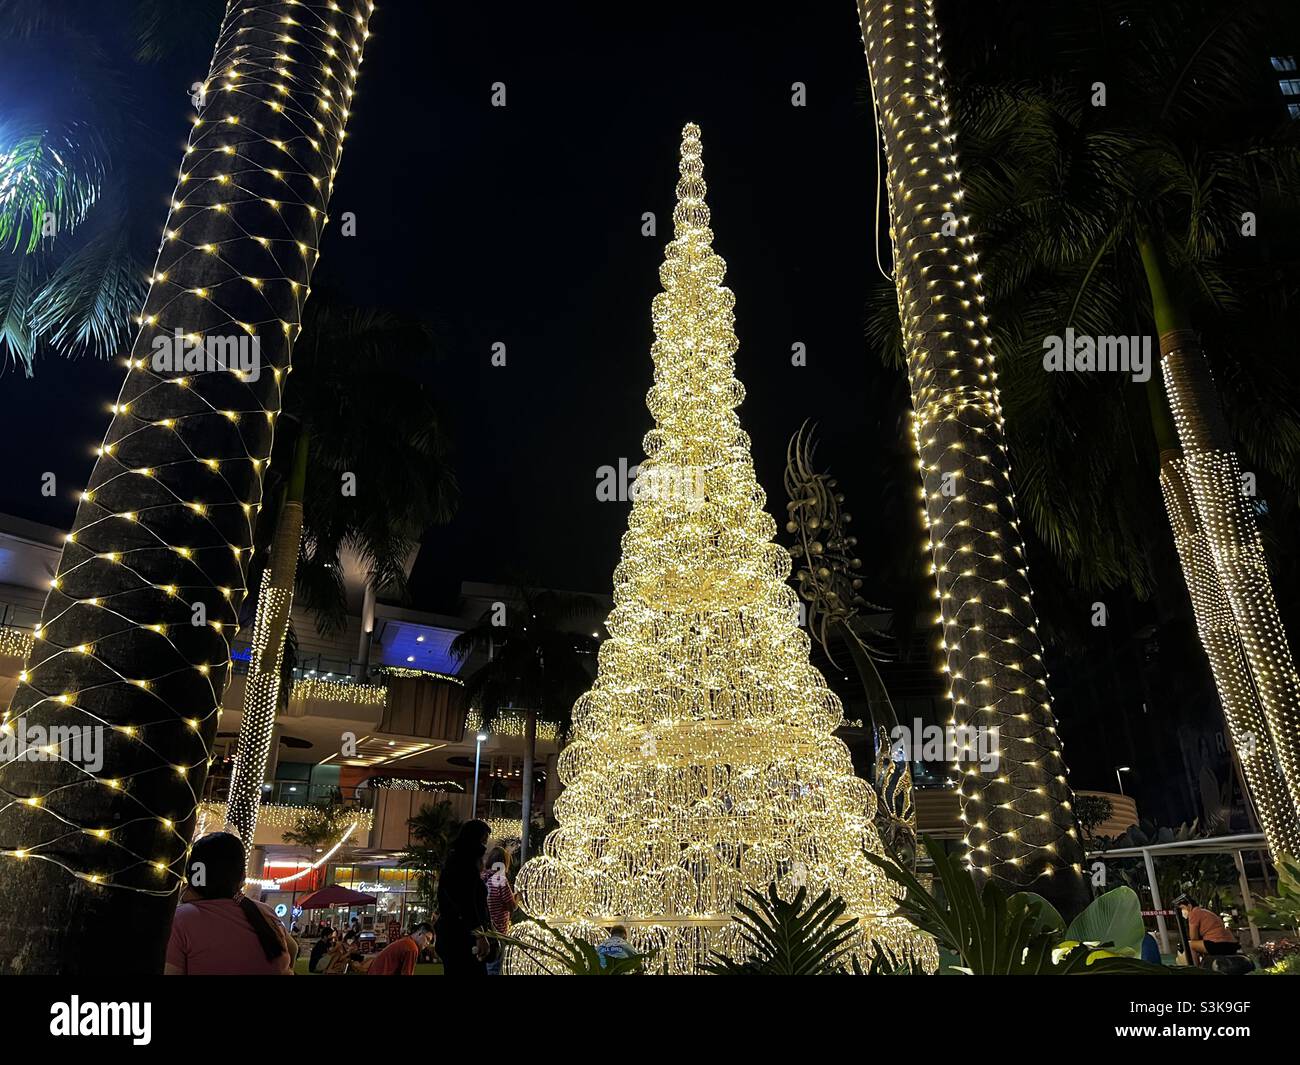 Elegant Christmas tree adorned with ball of lights. Philippines has the longest Christmas celebration in the world. Stock Photo